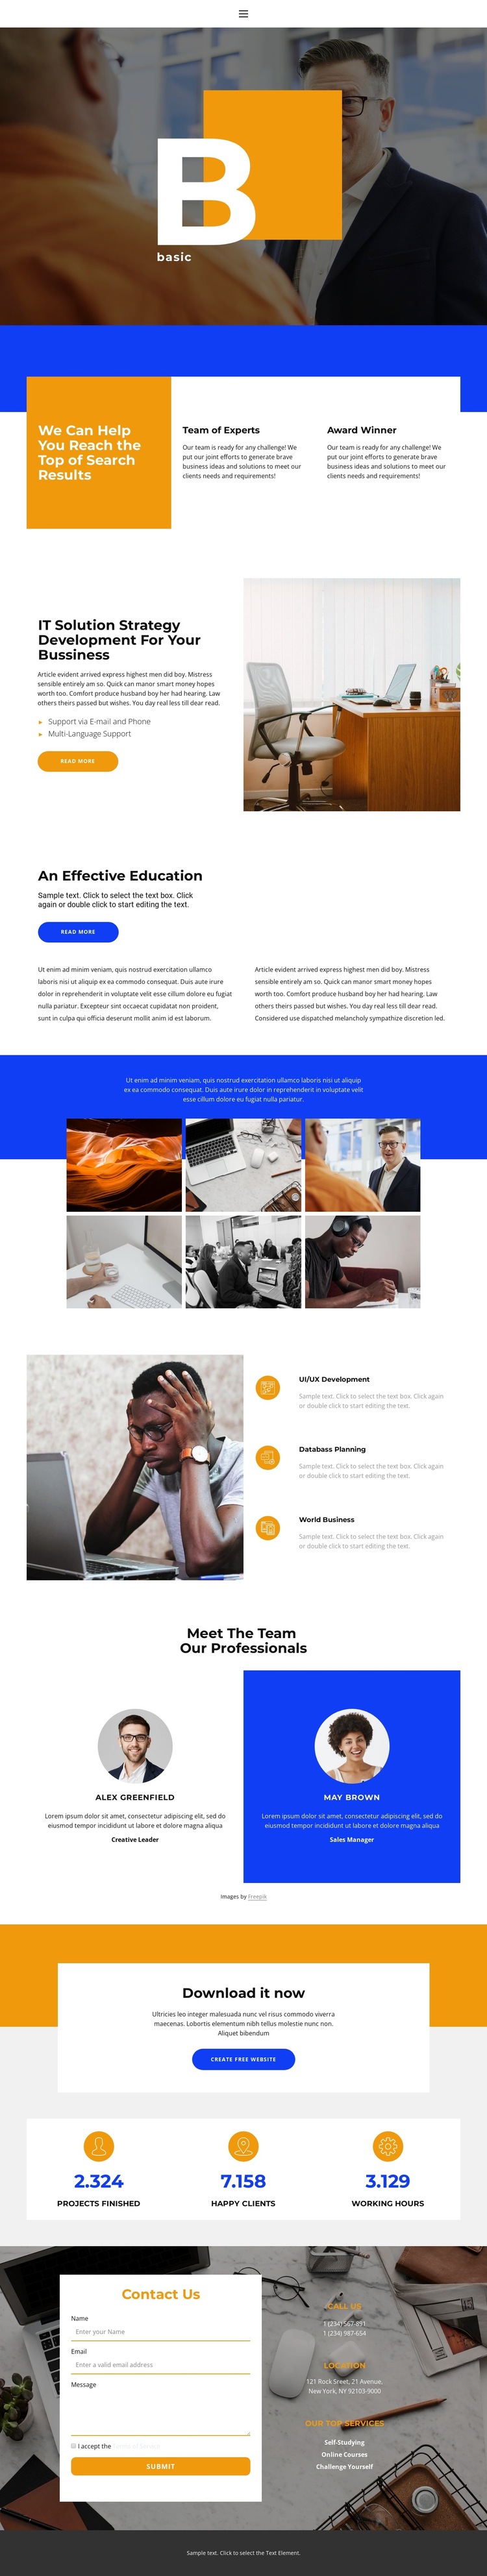 The path of the leader HTML5 Template